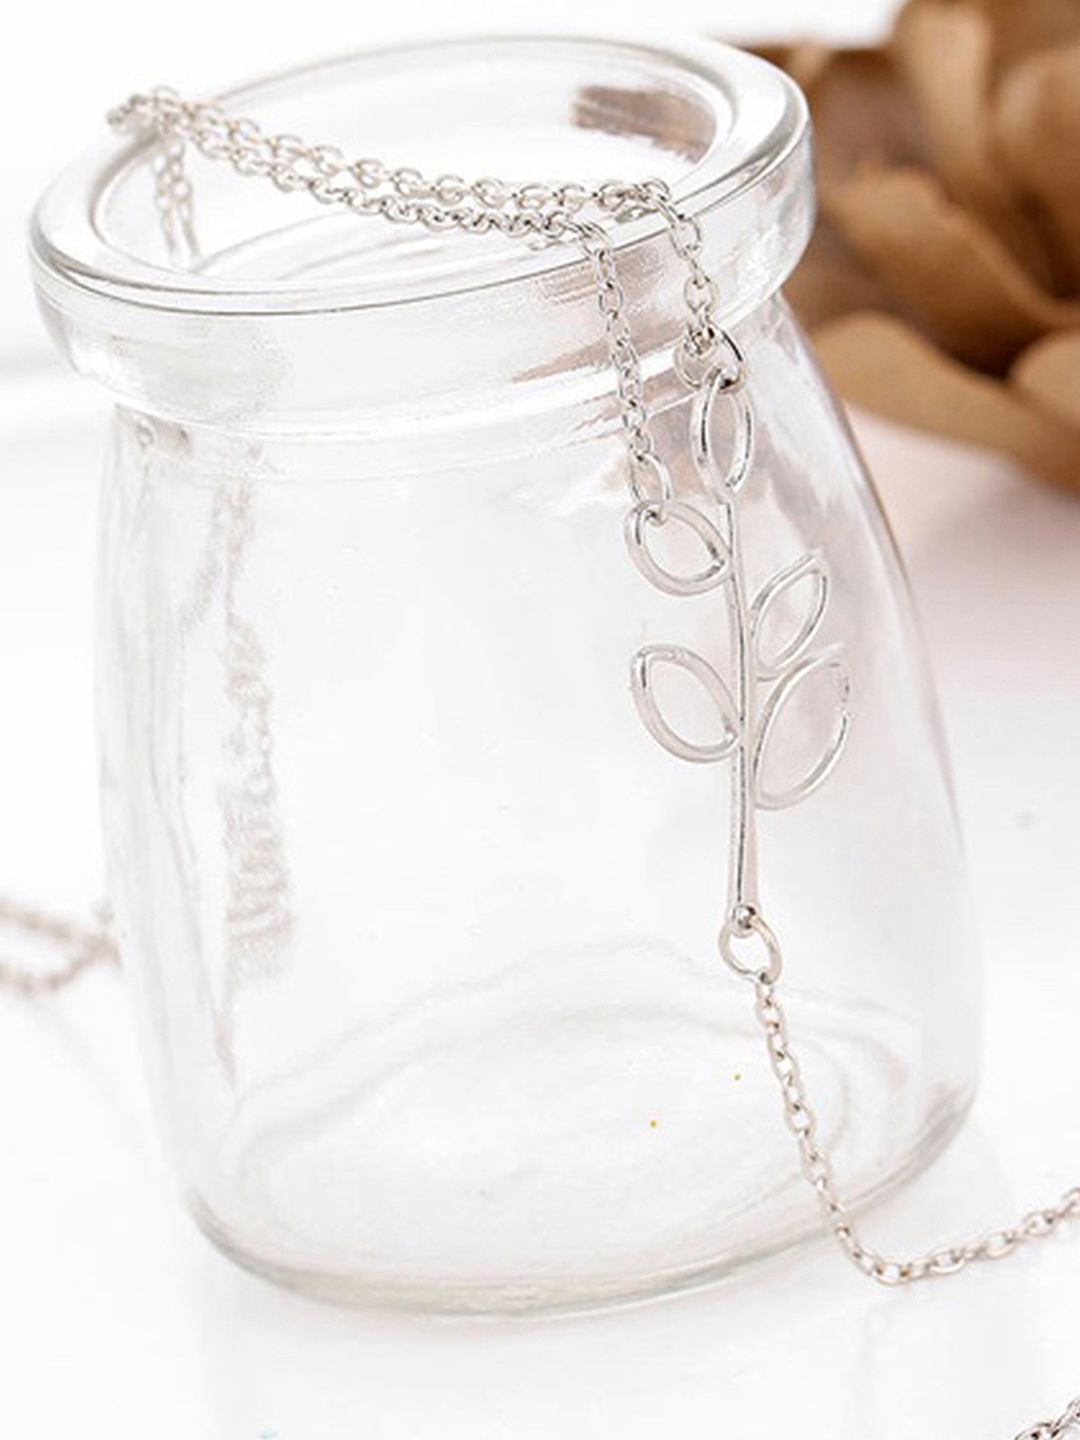 Silver Plated Double Layered Leaf Pendant Necklace